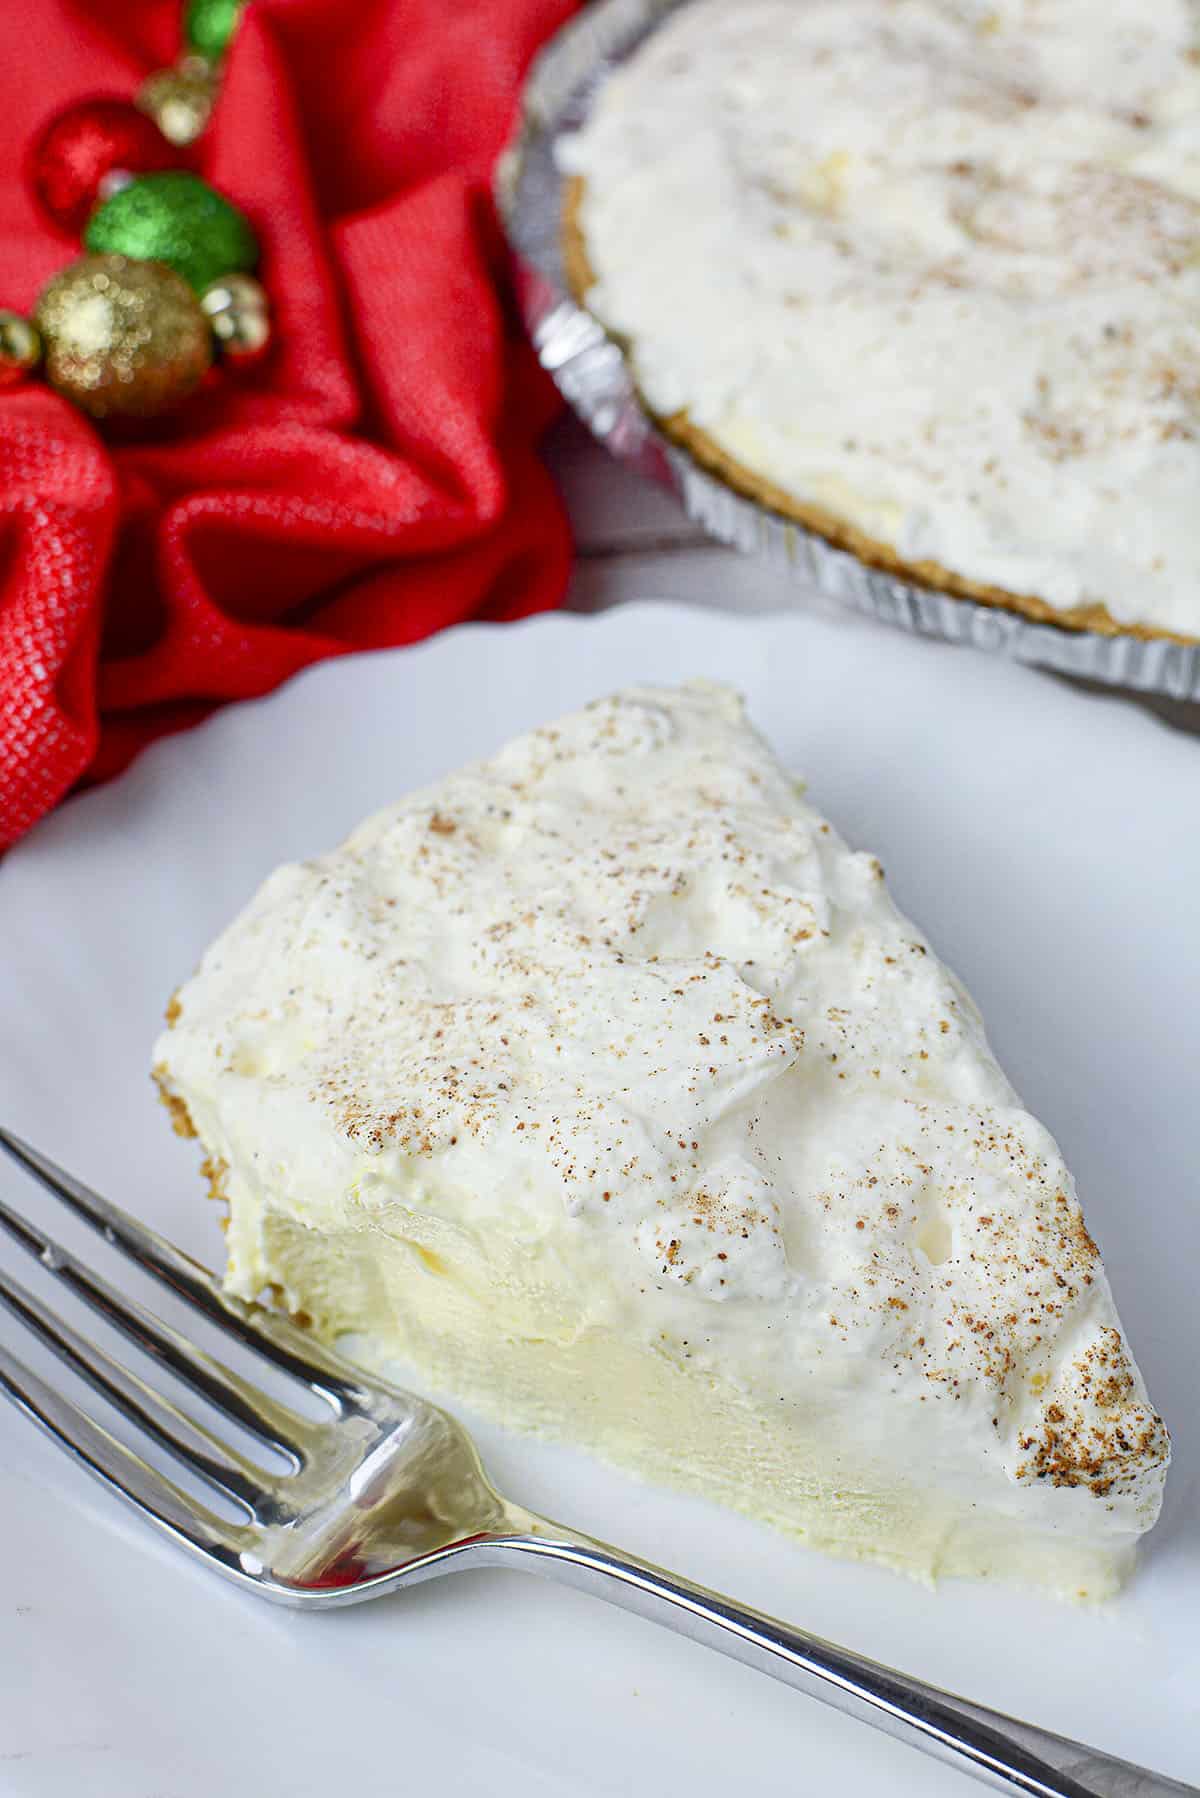 Eggnog pie on a white plate with freshly grated nutmeg sprinkled over top.